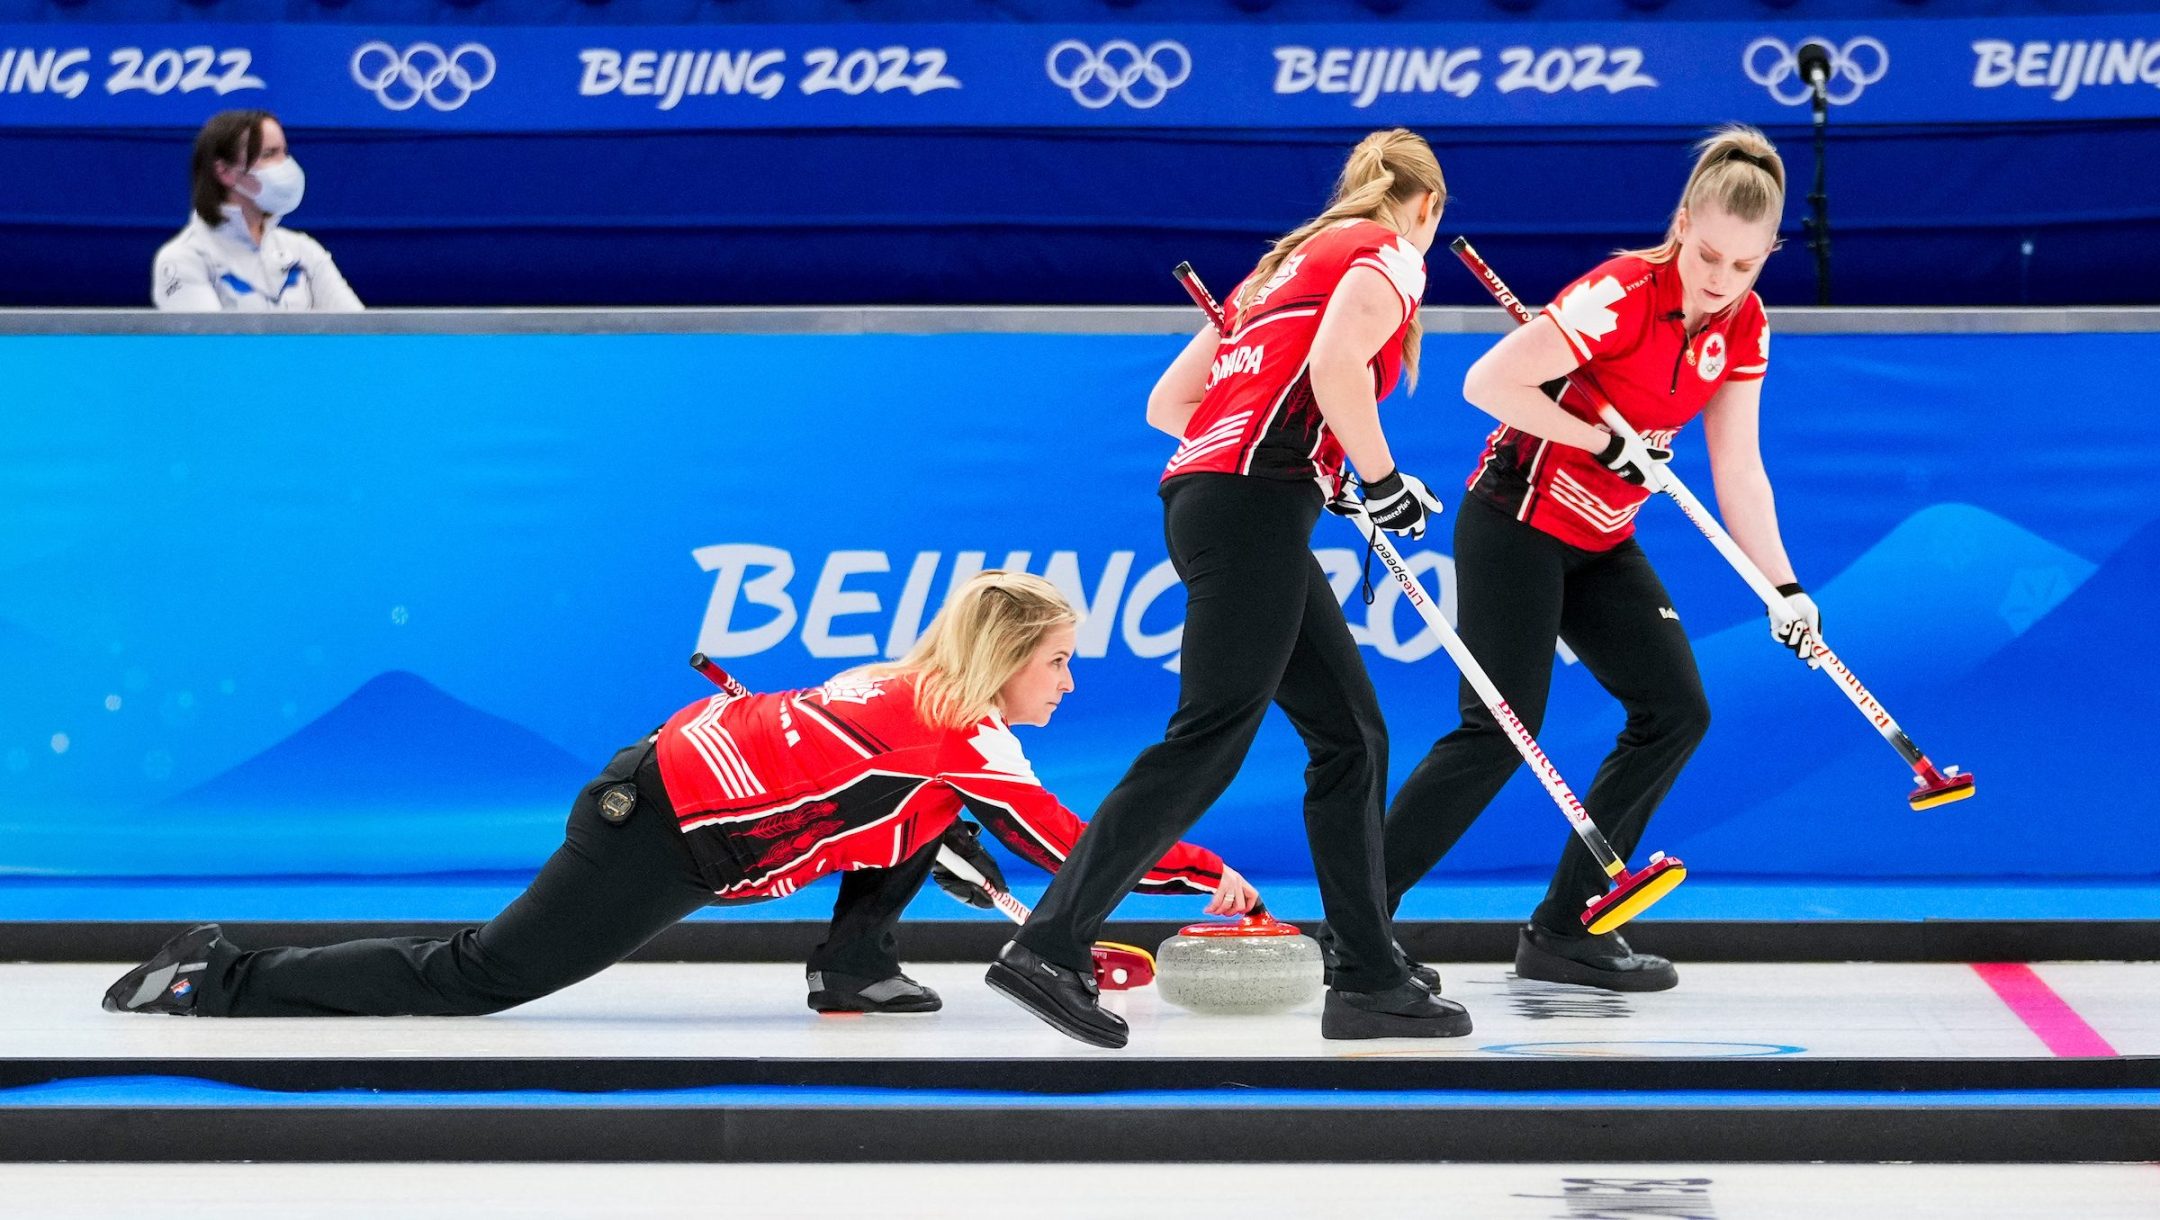 Measurement gives Sweden 7-6 win over Canada in women's curling at